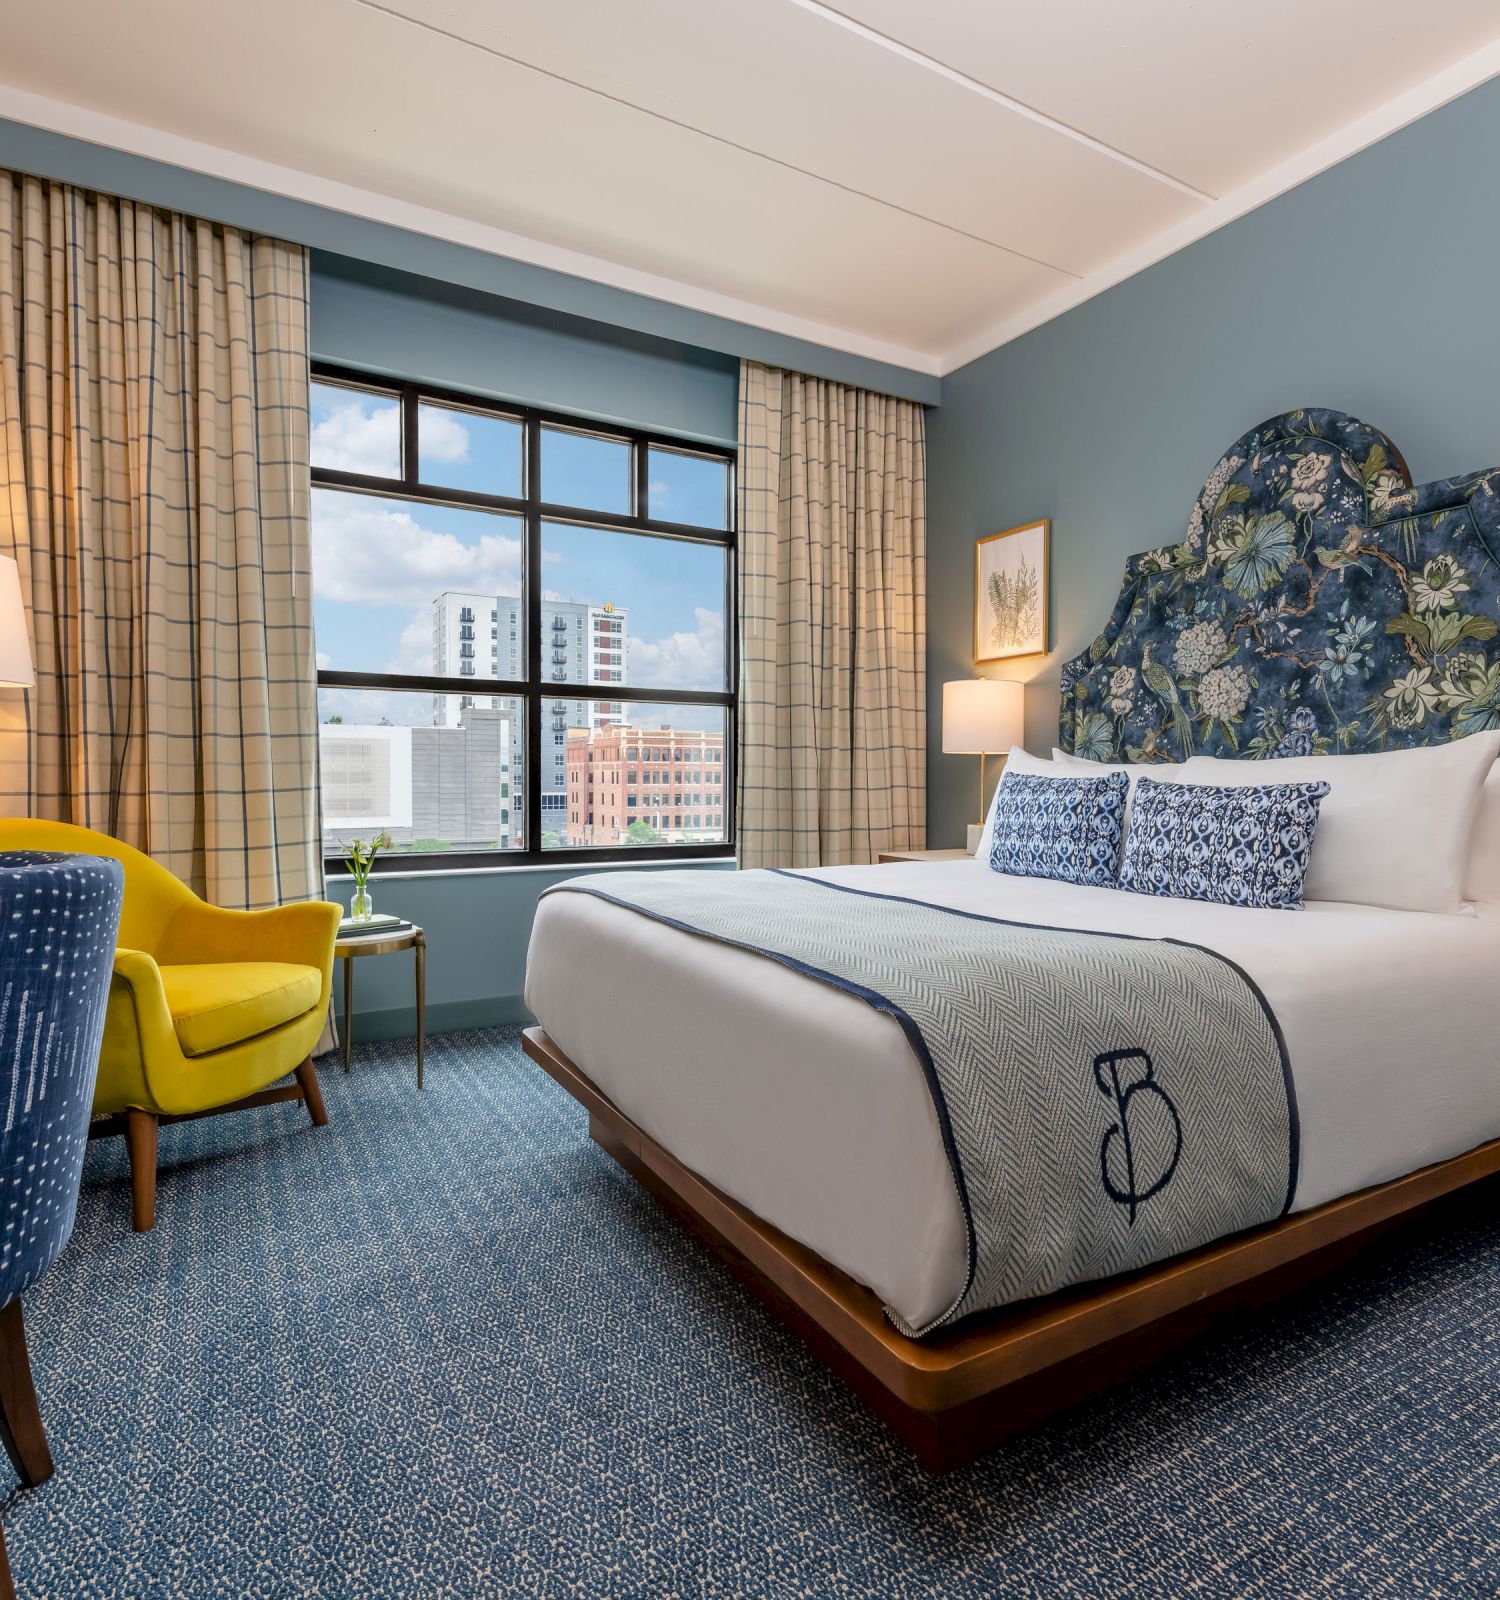 A cozy hotel room with a king-size bed, a desk, a yellow chair, and a window with curtains showcasing a city view. Decor includes lamps and wall art.